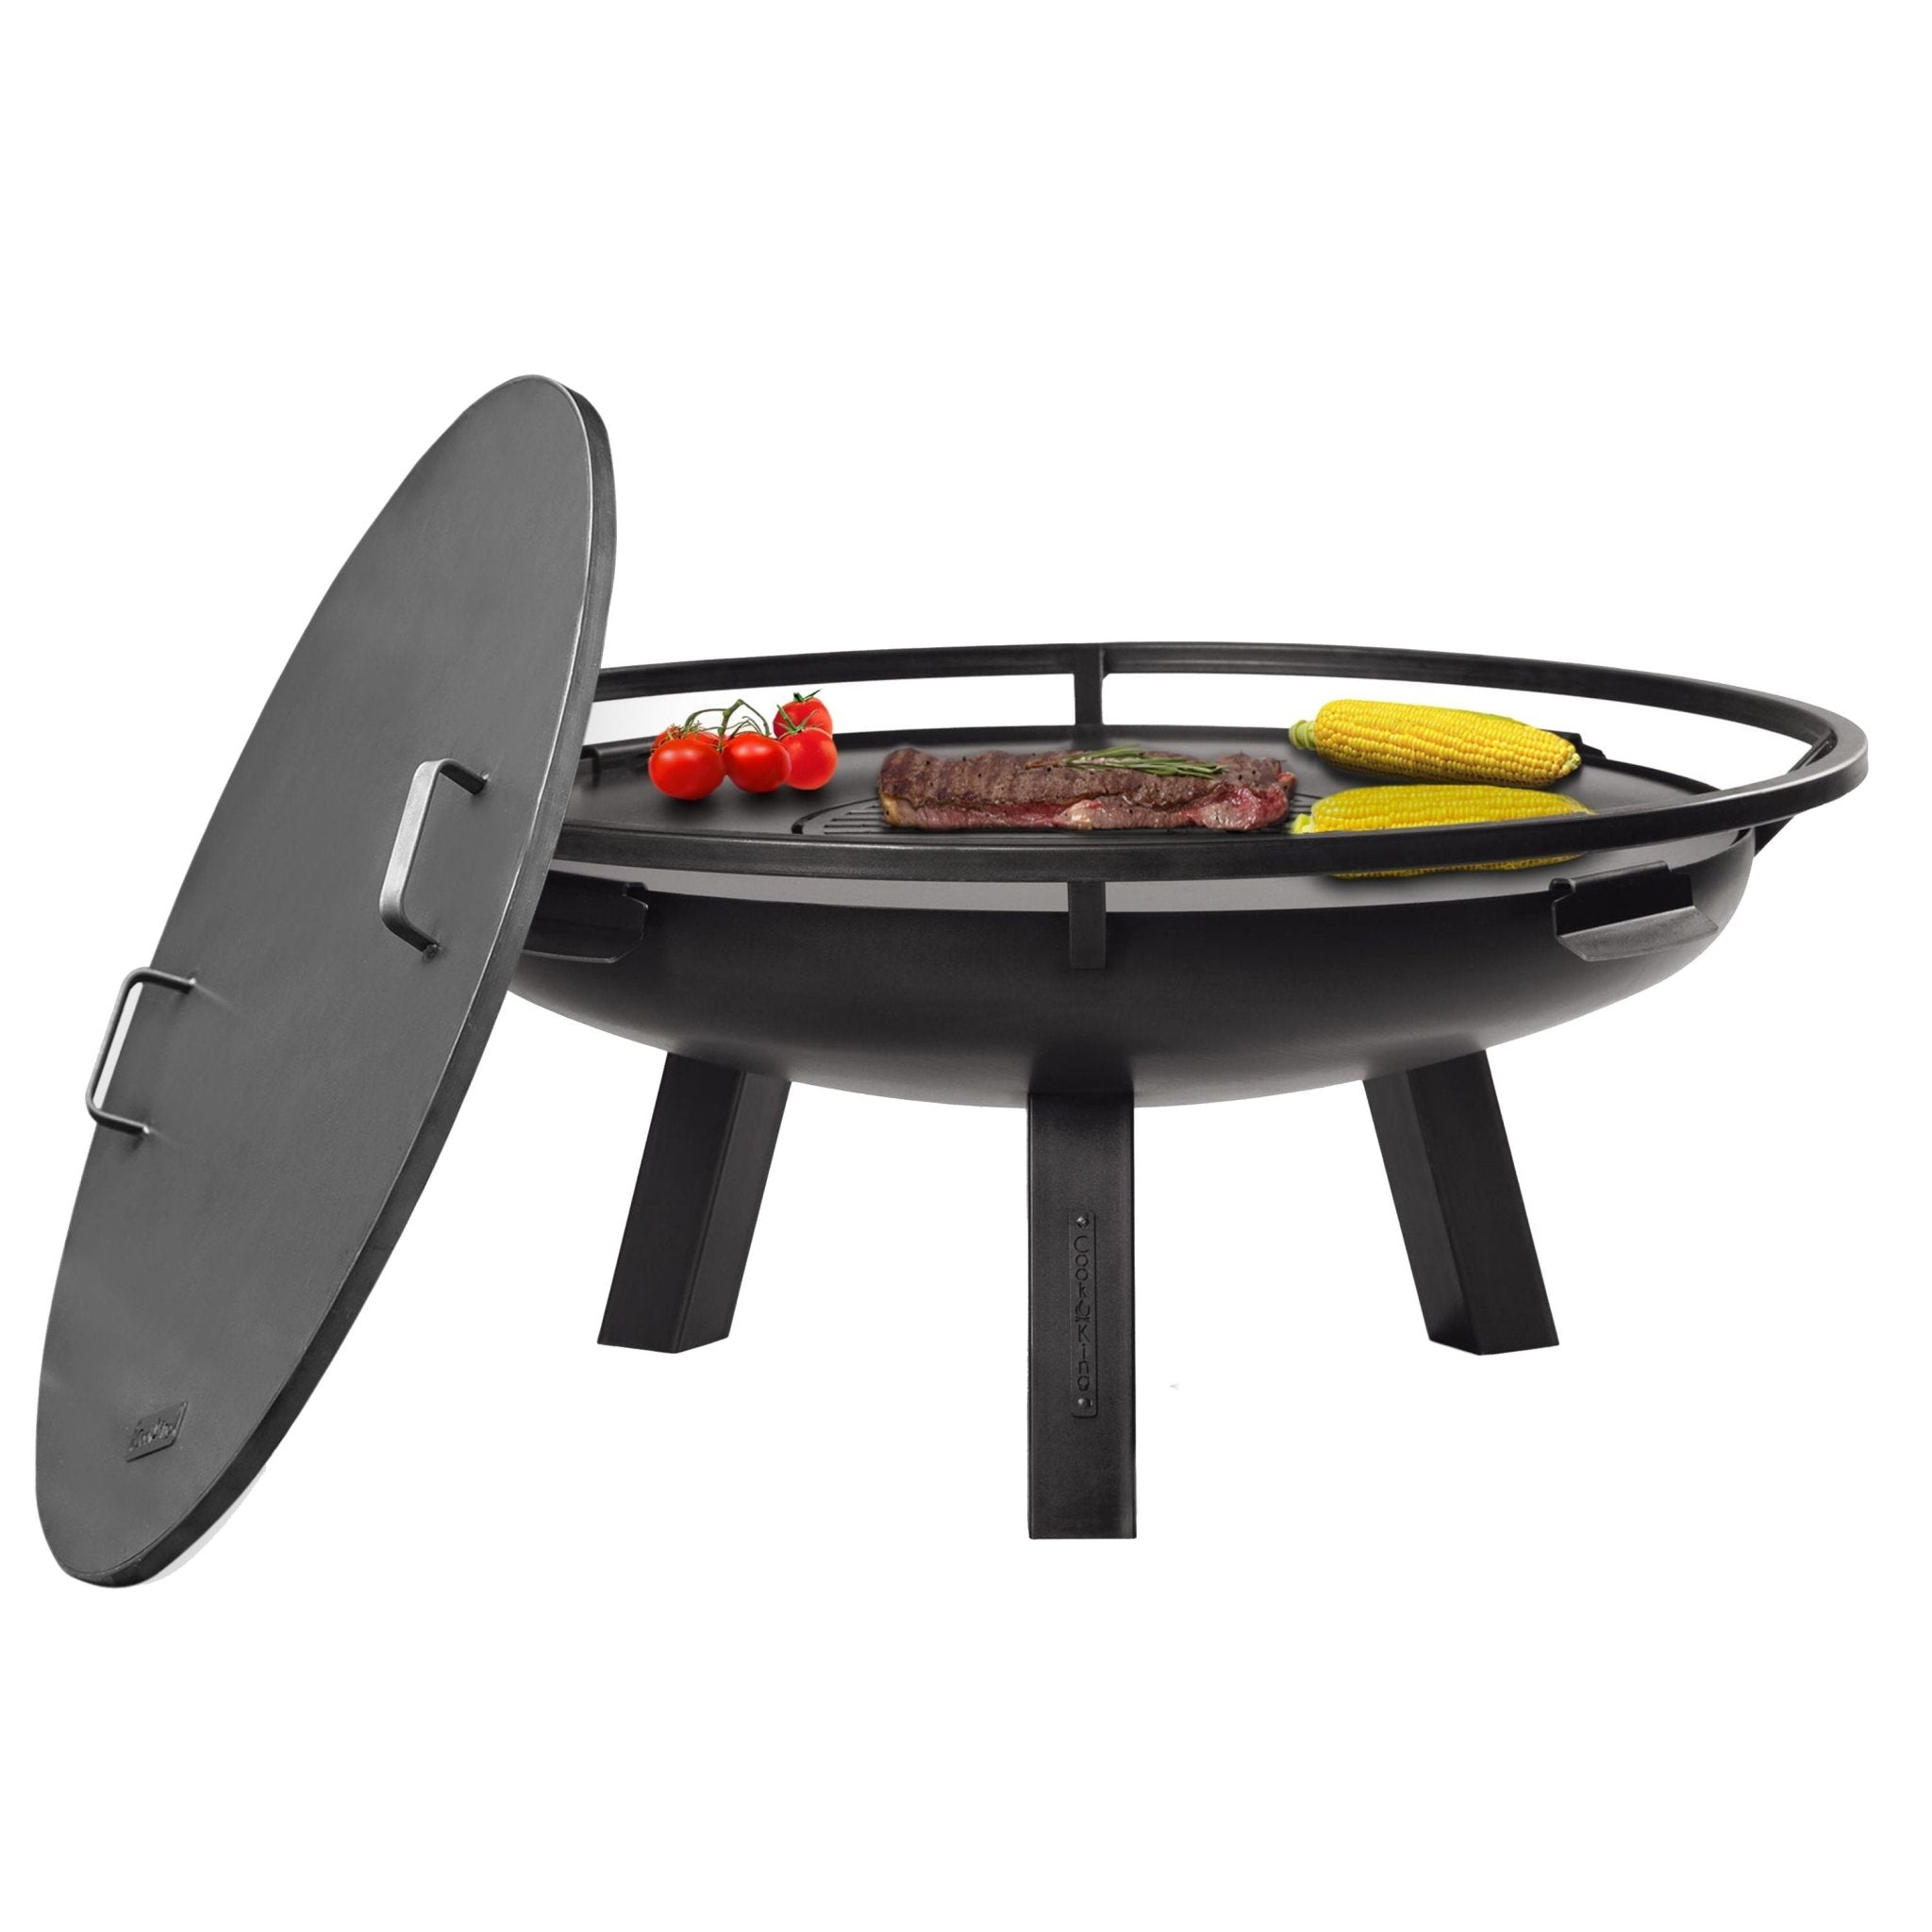 Ember 24" Fire Pit with Grill Plate and Cover Lid - Good Directions